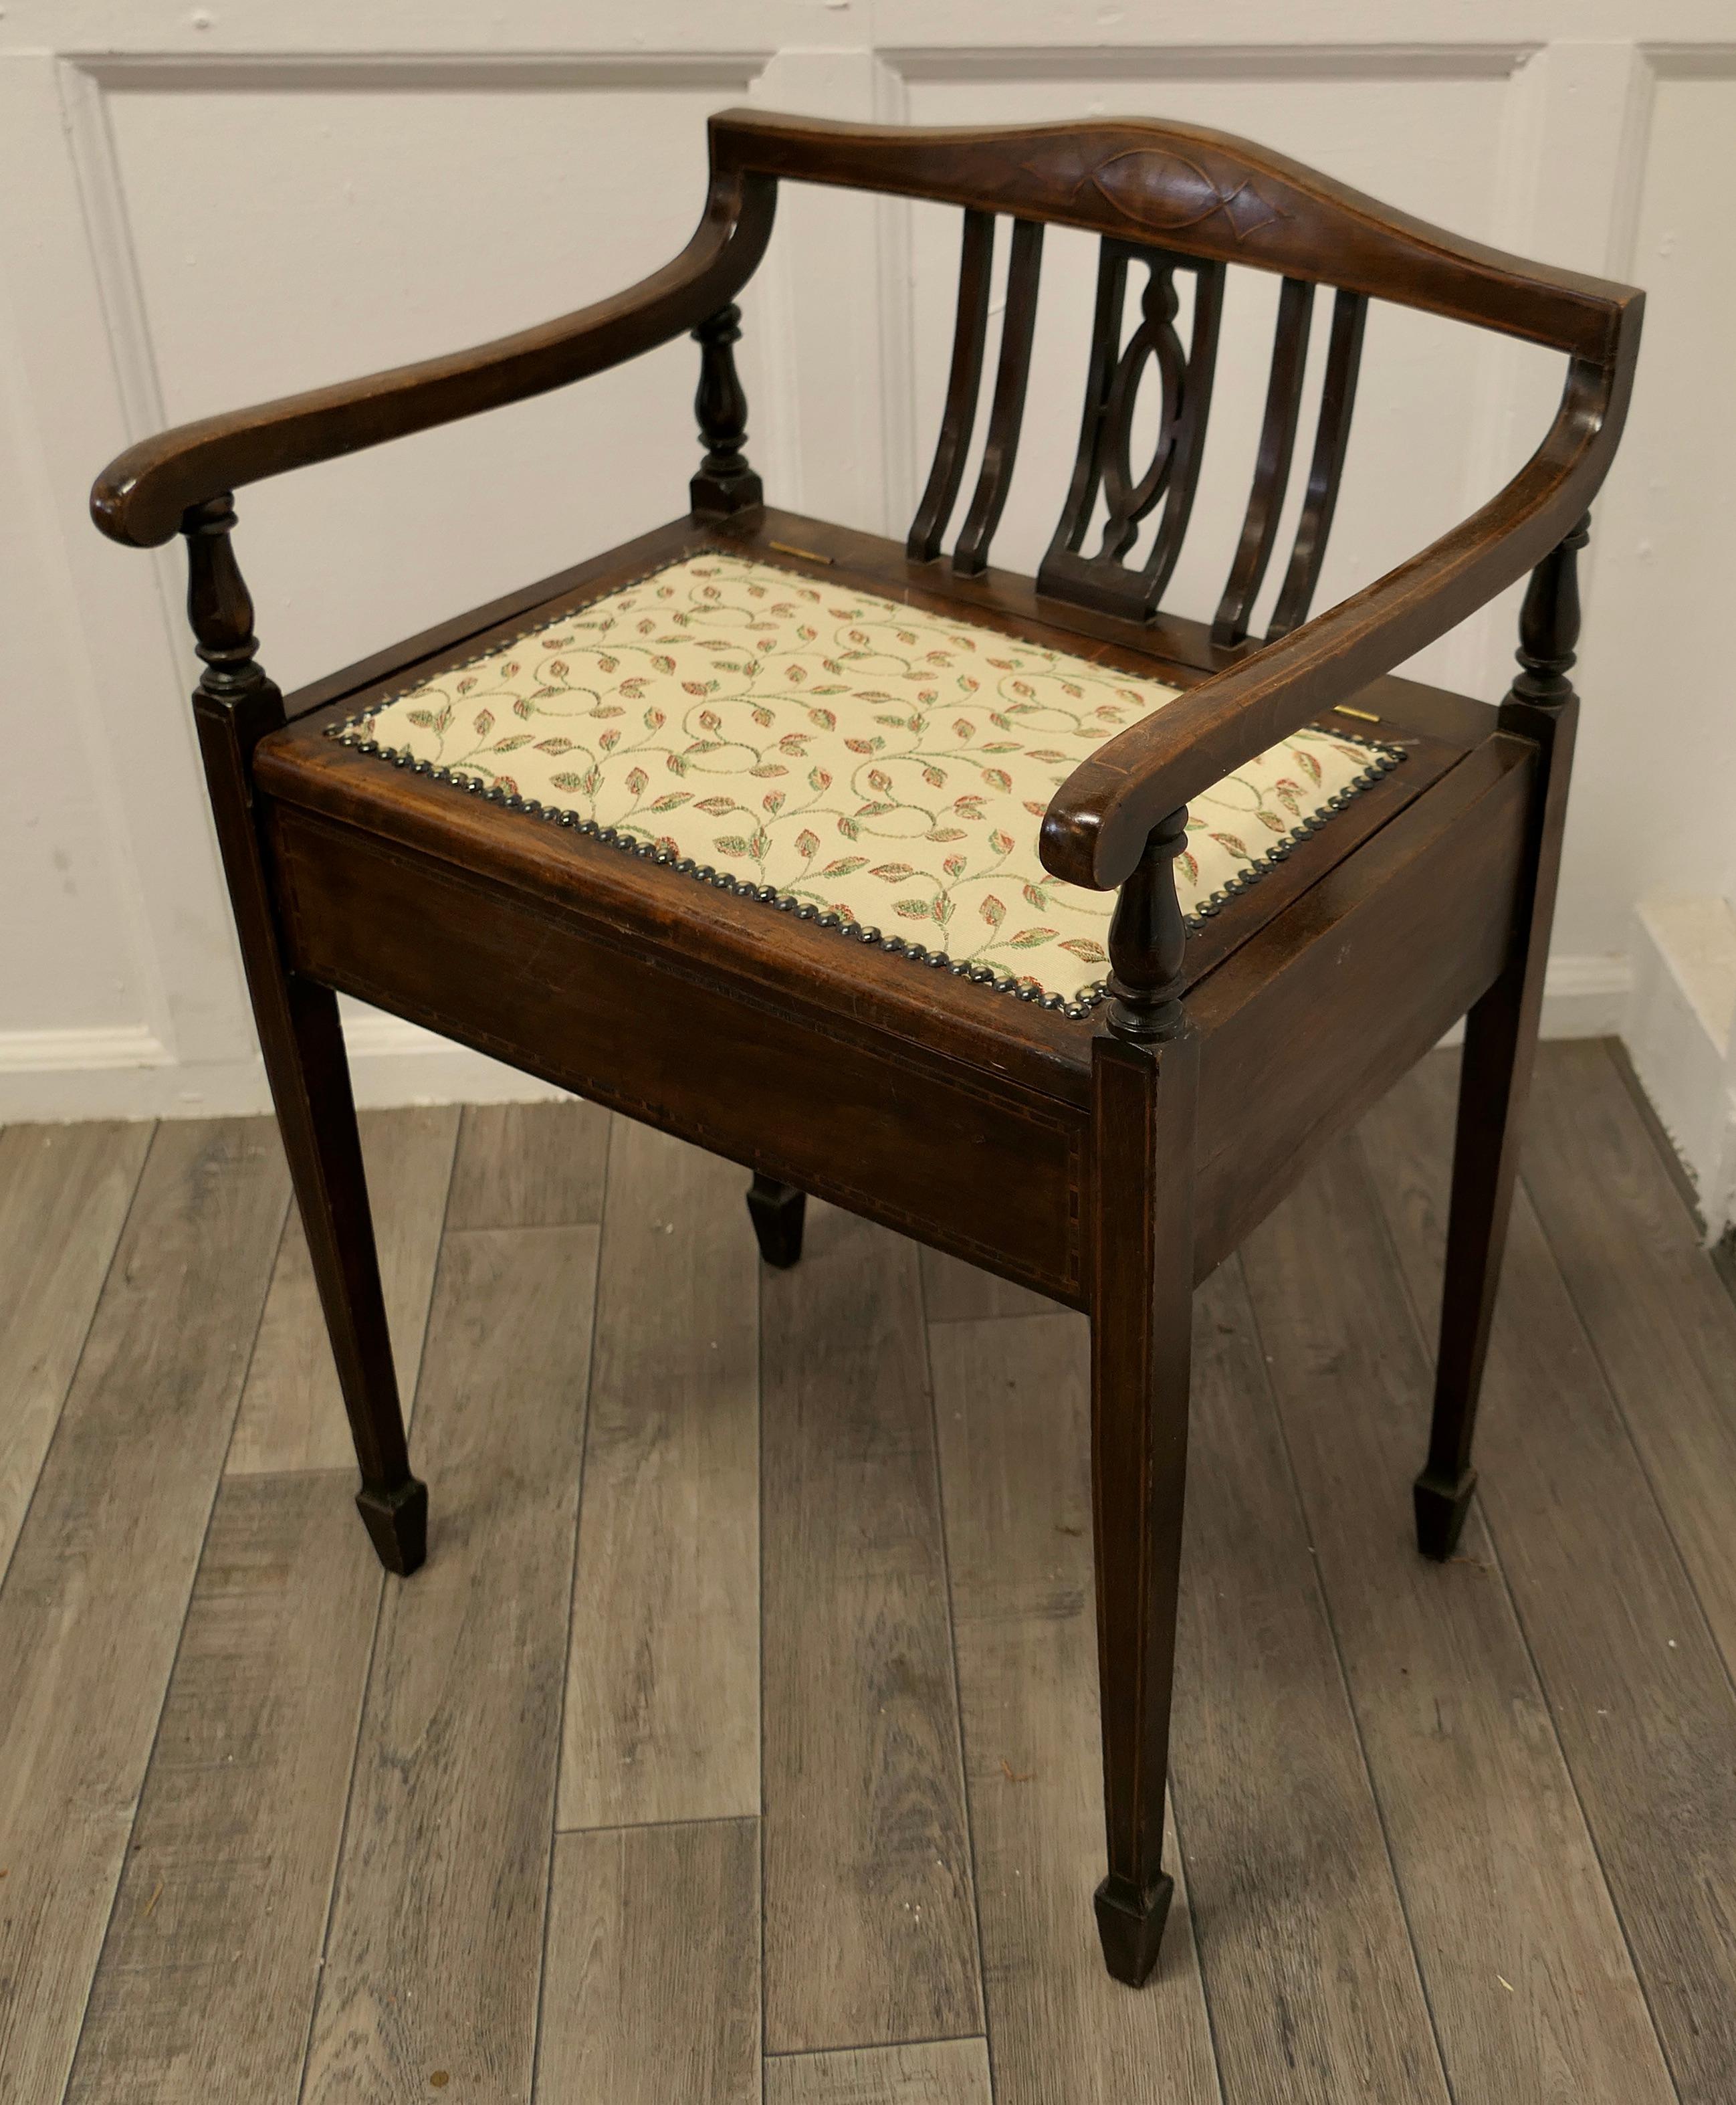 An Edwardian upholstered piano stool.
 
This elegant piano is in very good condition, it has a low back with a little carved decoration, the seat has been covered with a fine woven linen material, the lid of the stool opens for the storage of